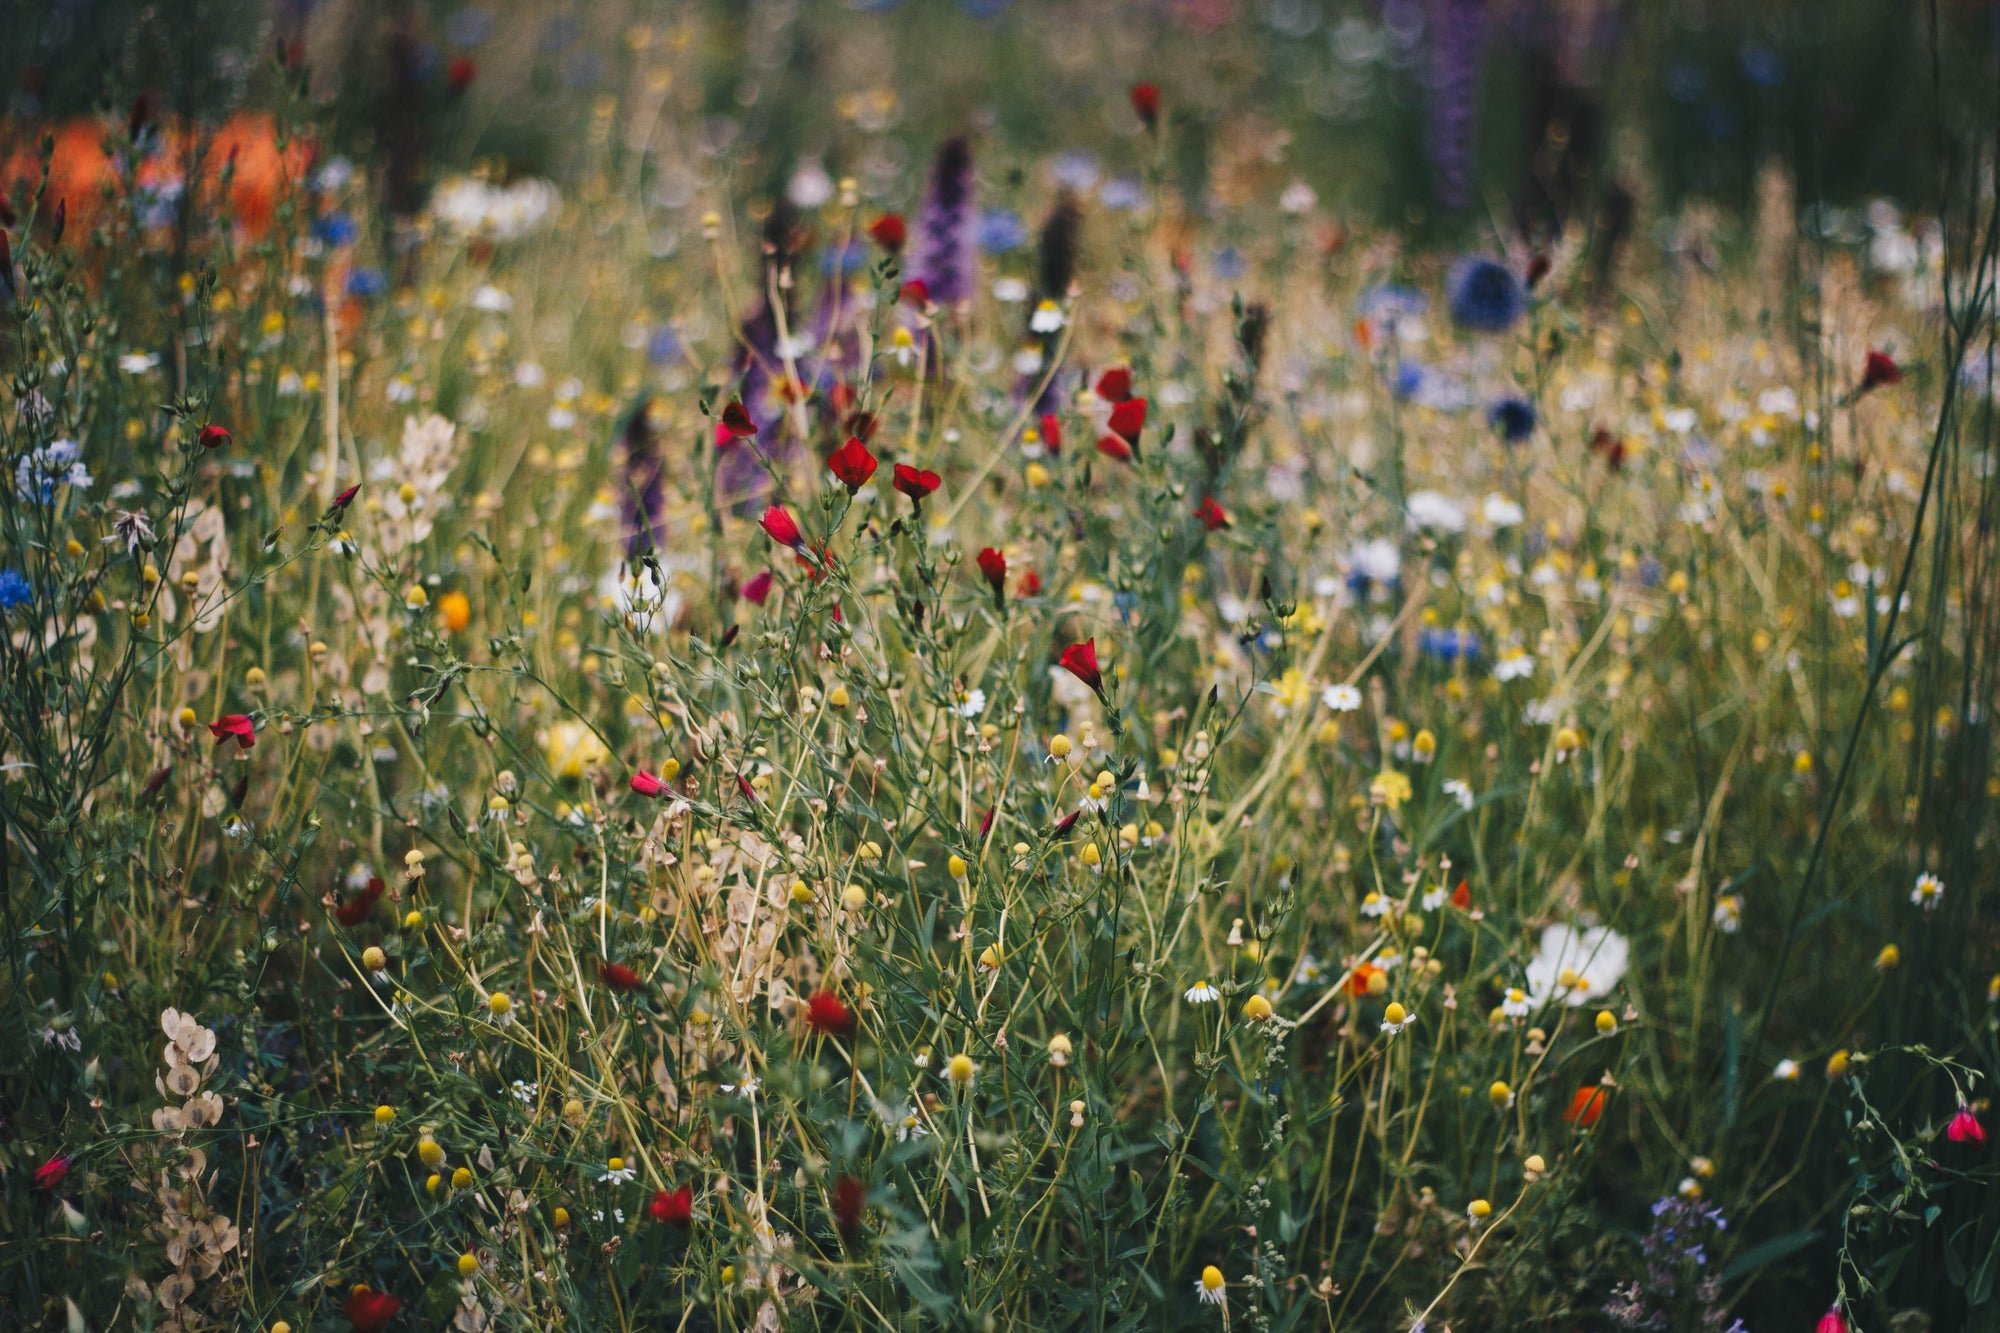 Growing Native: Why Wildflowers and Native Plants Make A World of Difference